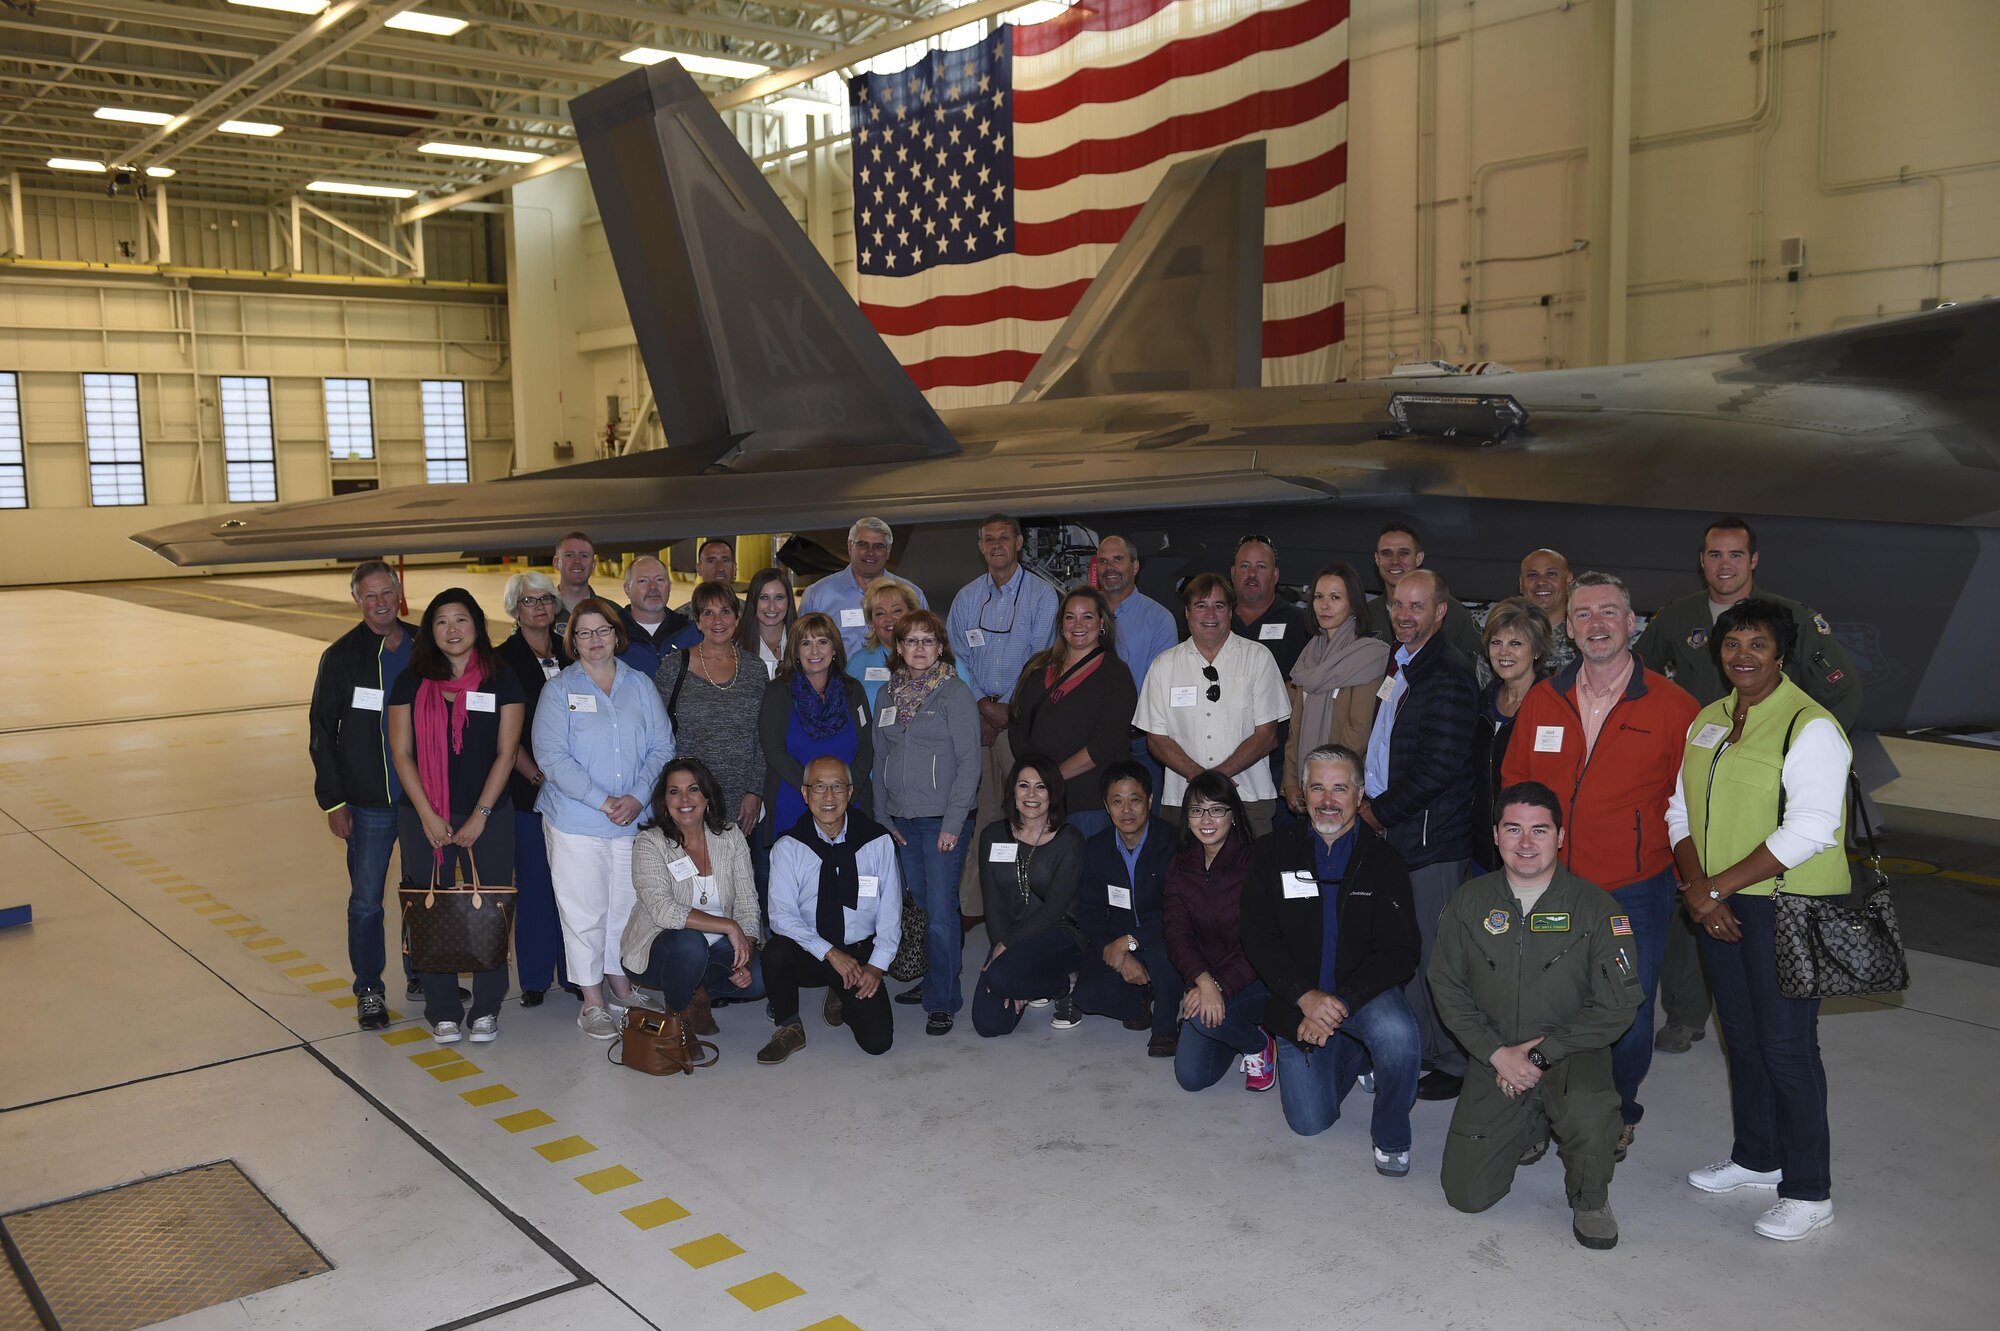 McChord civic leaders stand in front of an F-22 at Joint Base Elmendorf-Richardson, Alaska, Aug. 31, 2016. The group learned about the F-22 mission first hand, from the men and women who fly it. (U.S. Air Force photo/ Staff Sgt. Naomi Shipley)